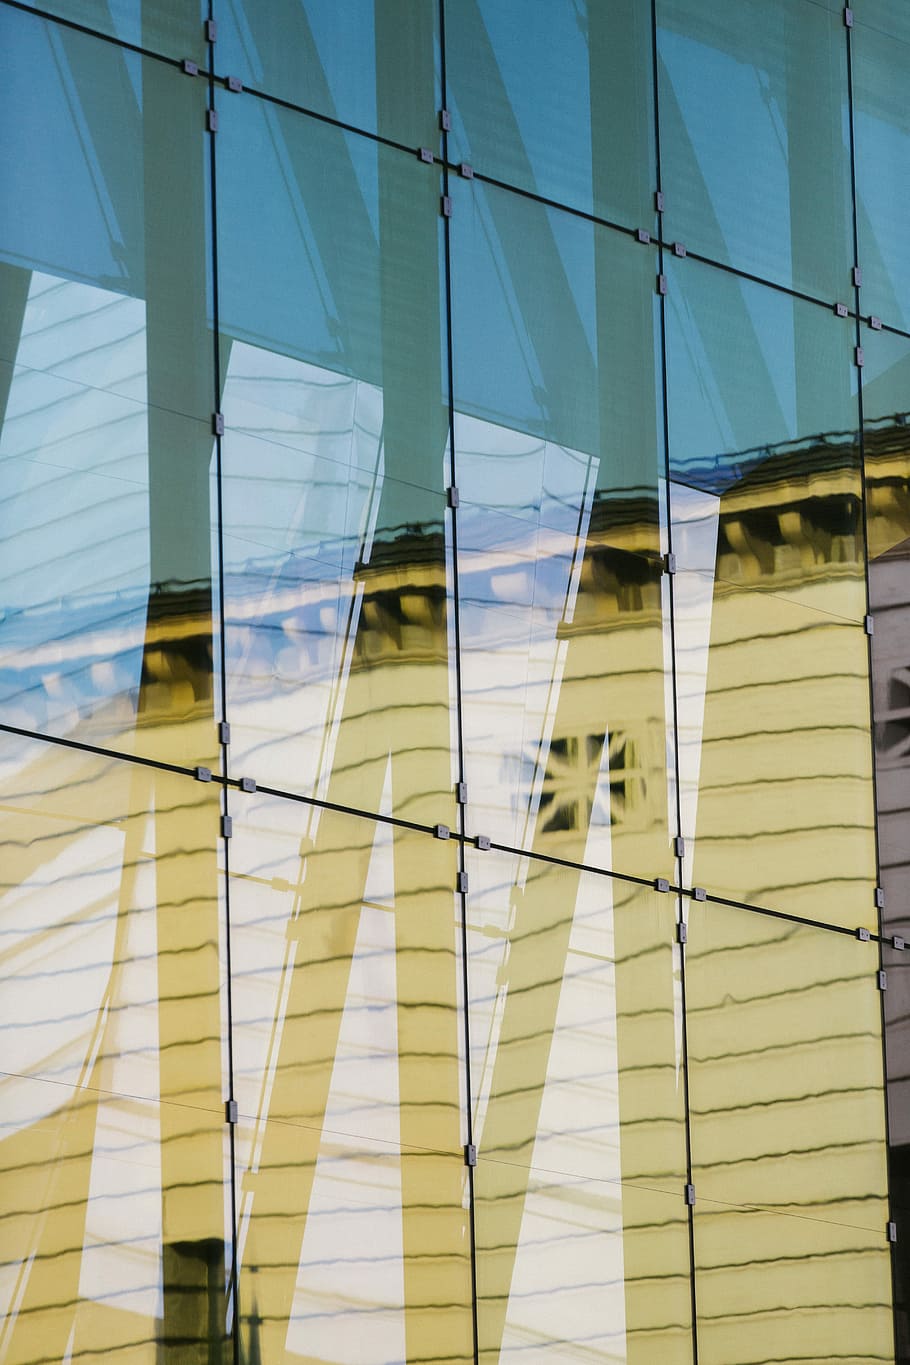 reflection of white structure in building window, glass, window, reflection, abstract, shapes, pattern